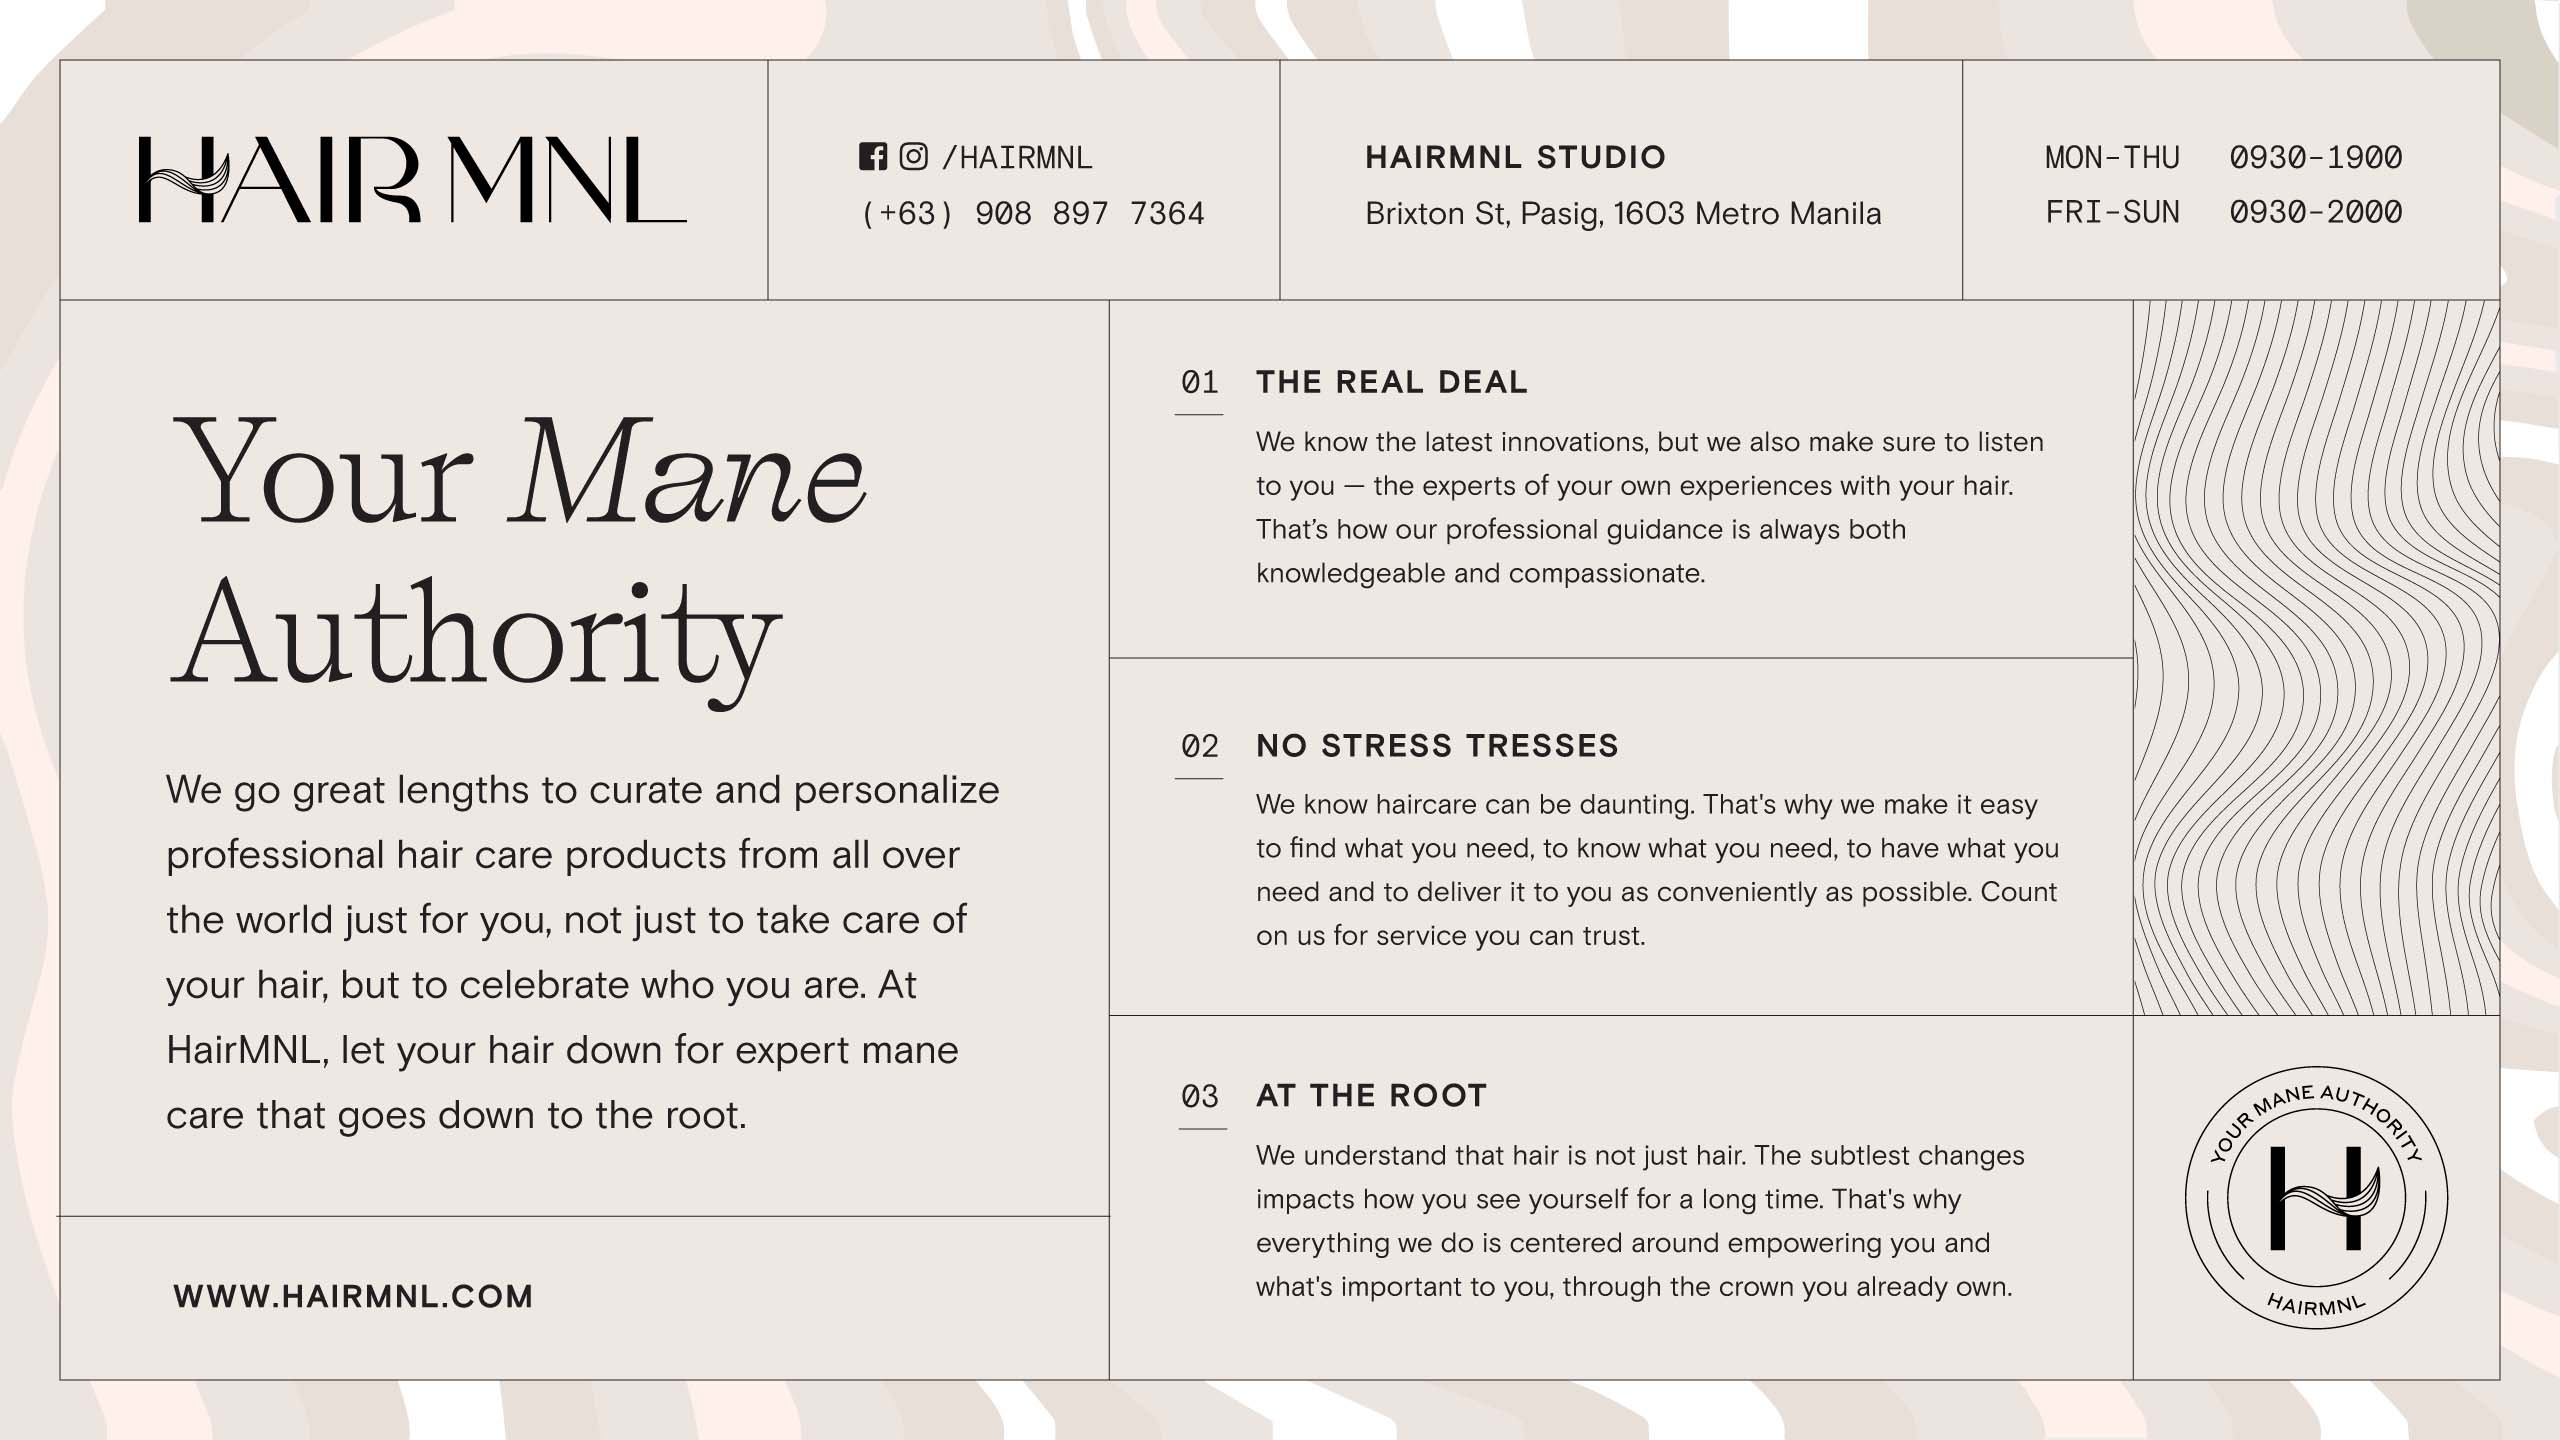 Branding, copywriting, and typography for professional haircare brand HairMNL